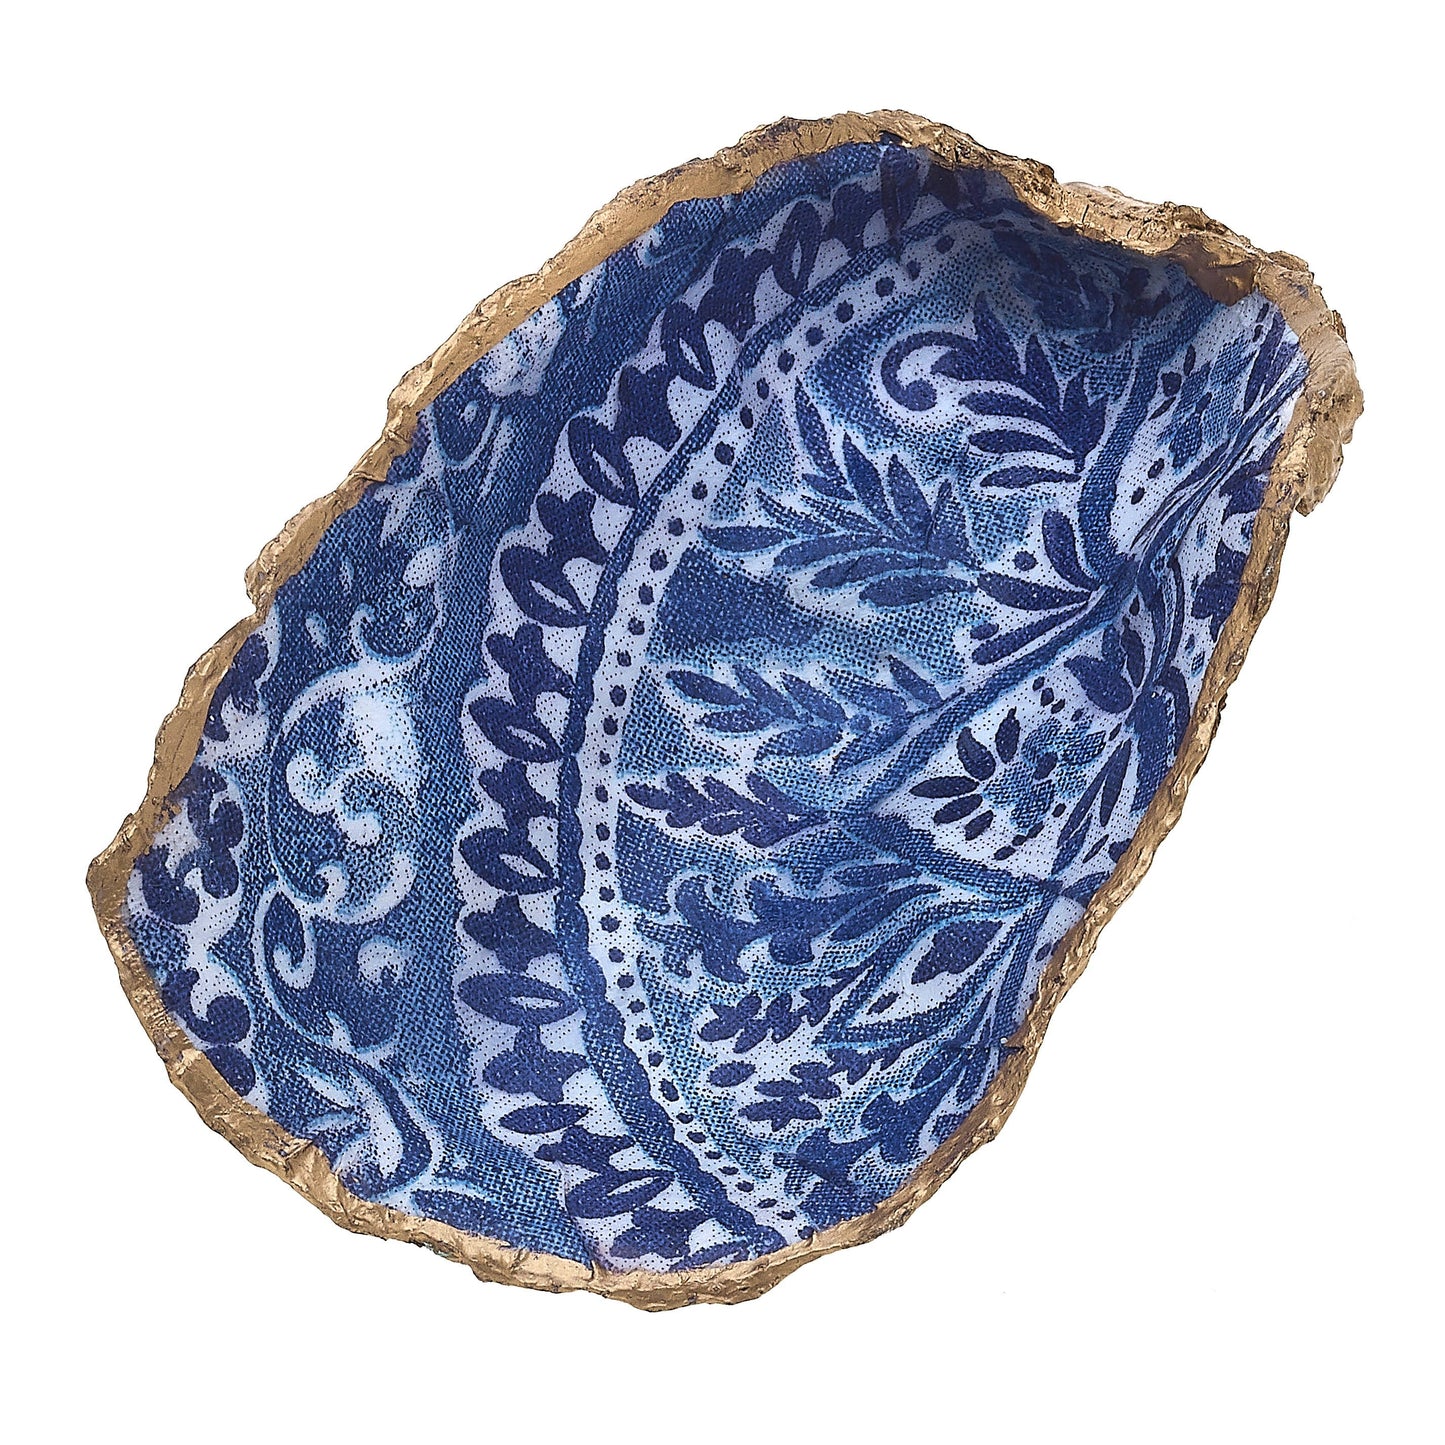 CANVAS Style - Catalina Decoupage Oyster Ring Tray in Blue & White